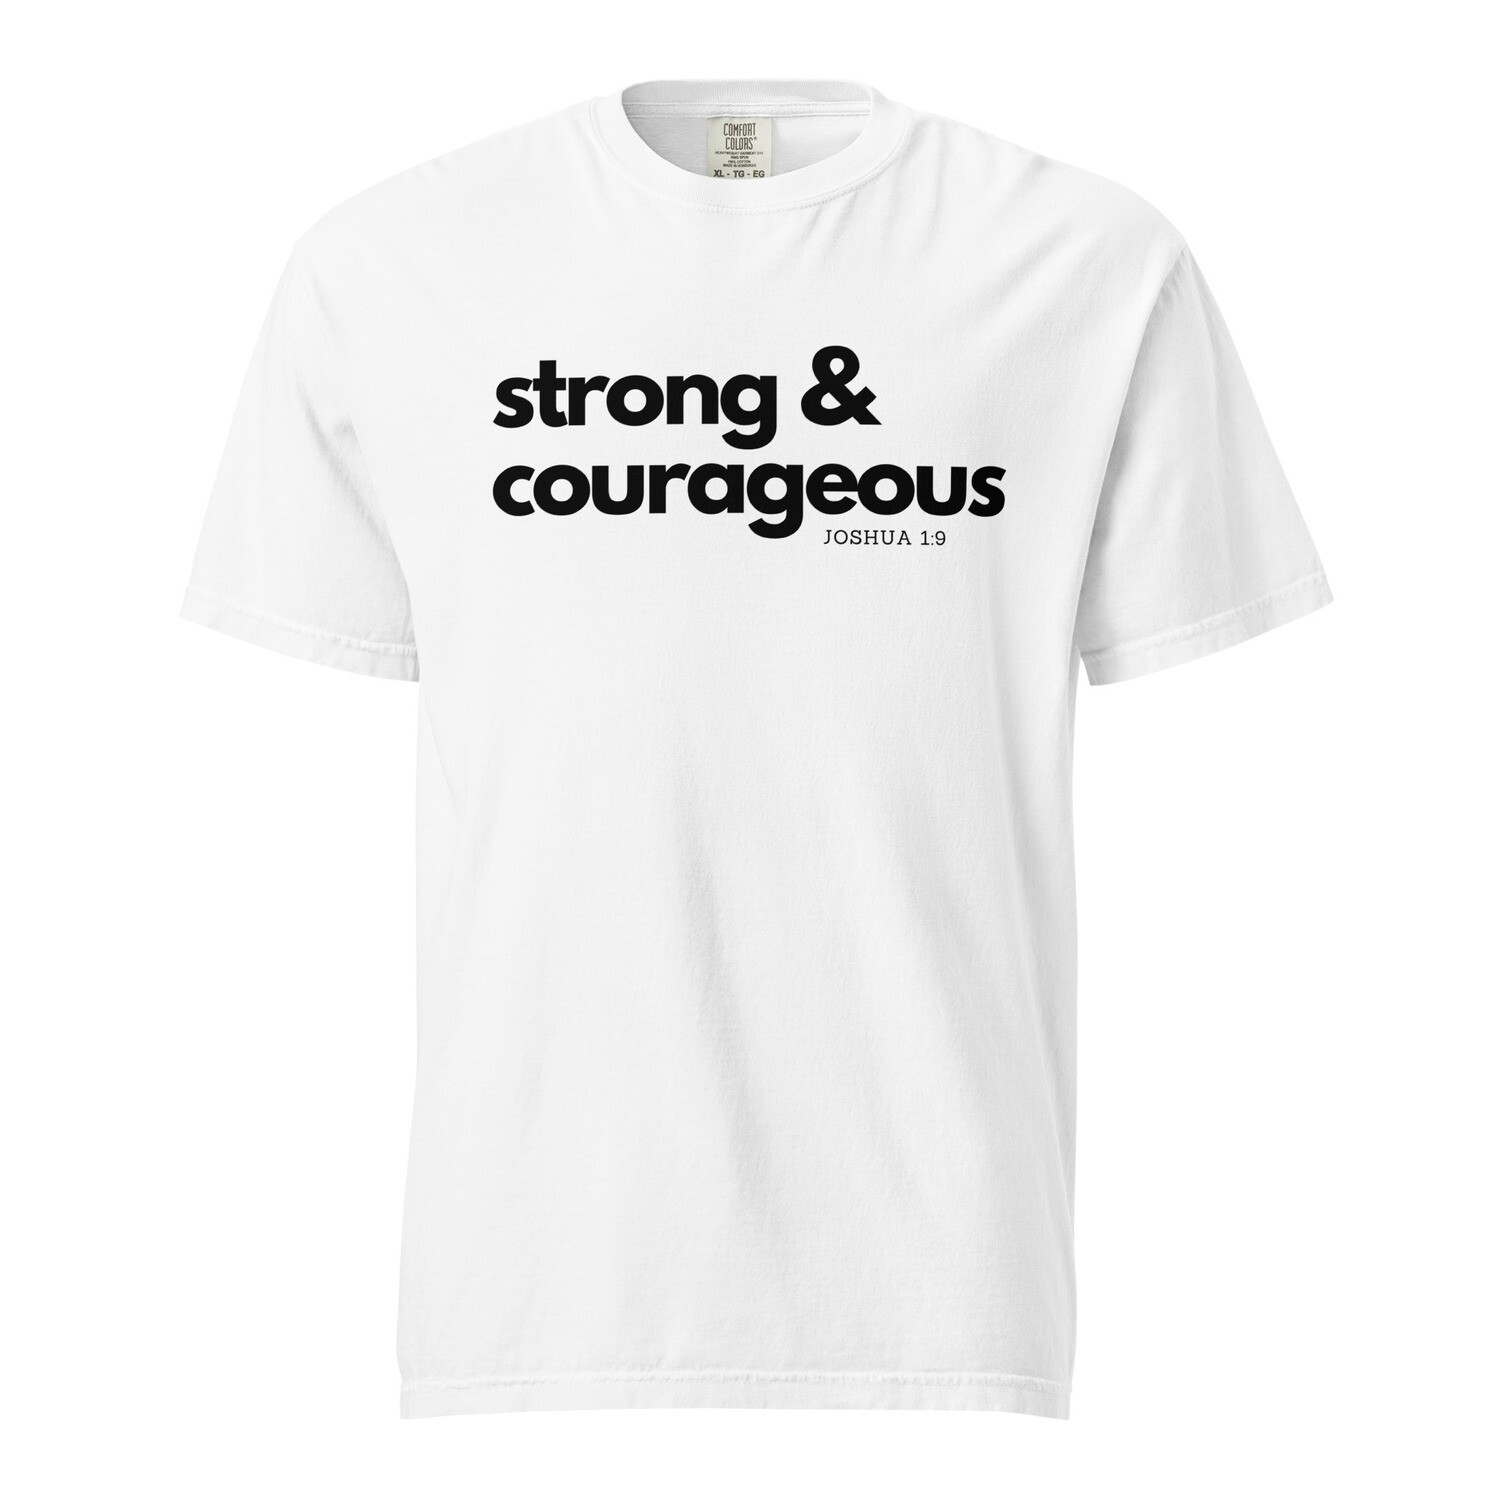 Courage - Unisex garment-dyed heavyweight t-shirt - Comfort Colors